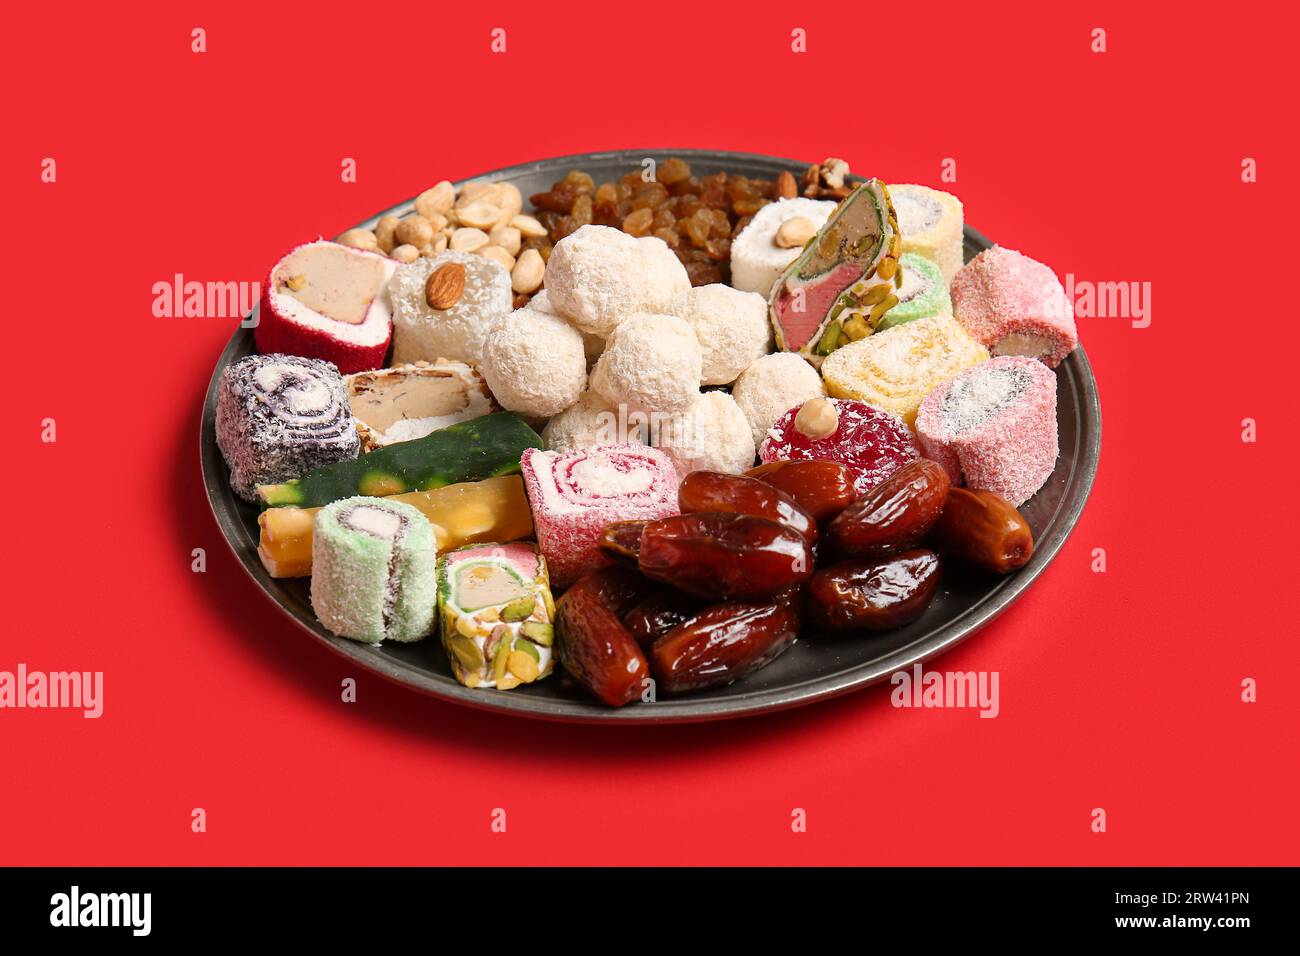 Plate with different tasty treats on red background. Divaly celebration Stock Photo